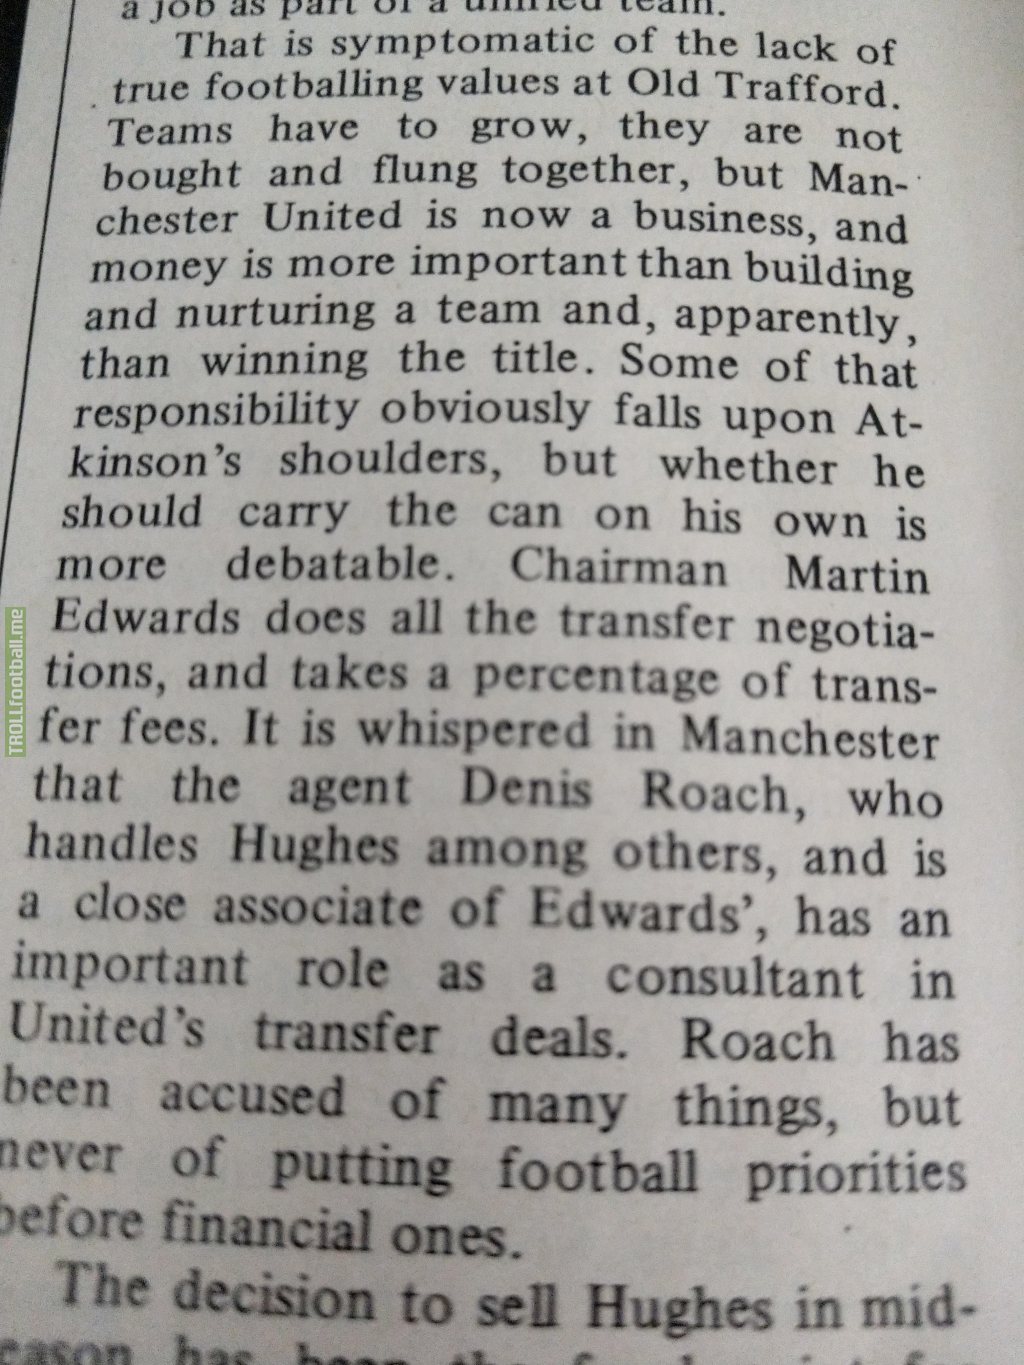 Found a 1986 article about the decline of Man United at the time. Thought this passage drew interesting parallels to today